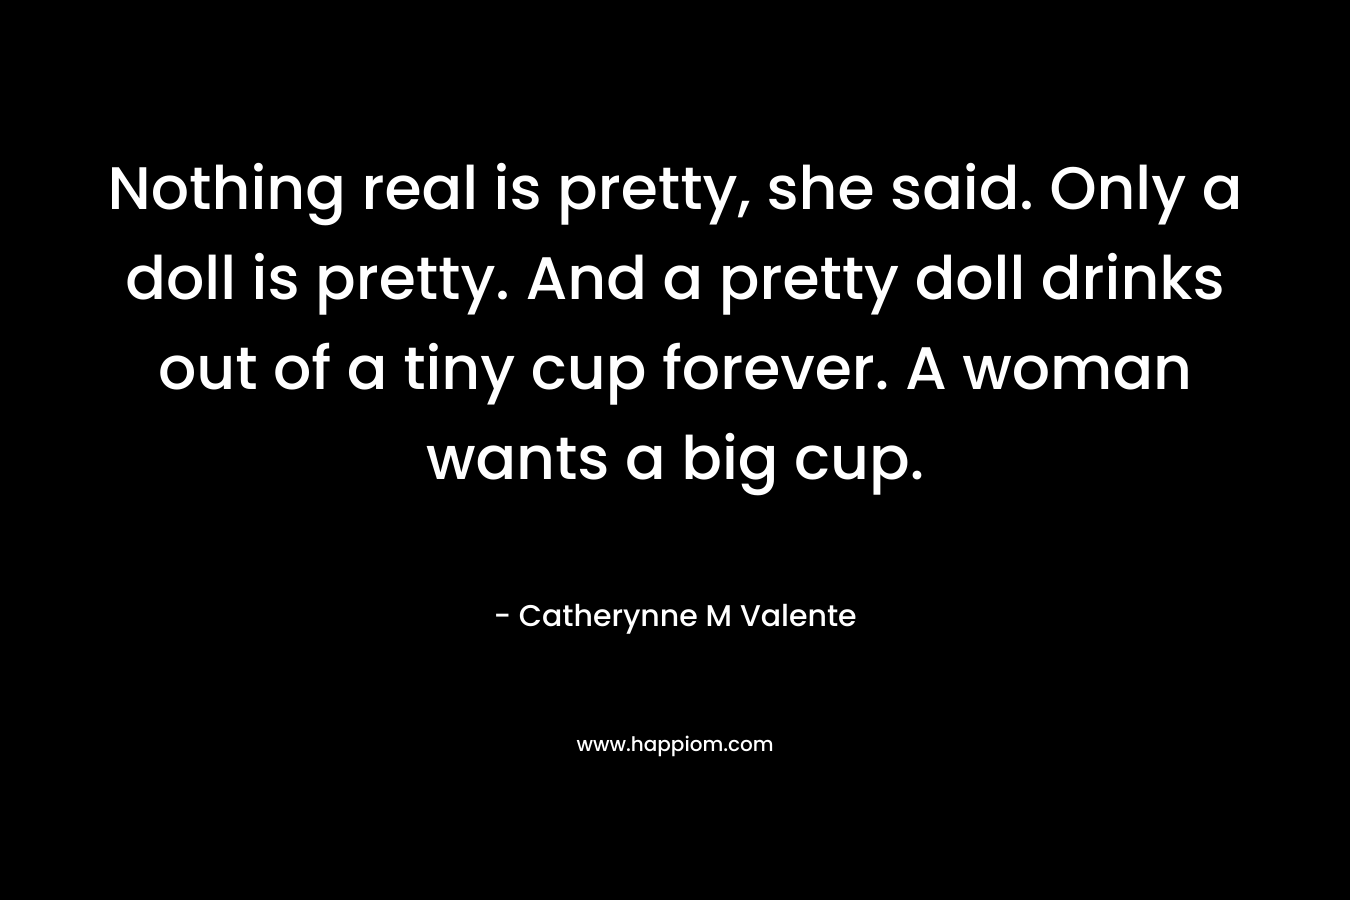 Nothing real is pretty, she said. Only a doll is pretty. And a pretty doll drinks out of a tiny cup forever. A woman wants a big cup.